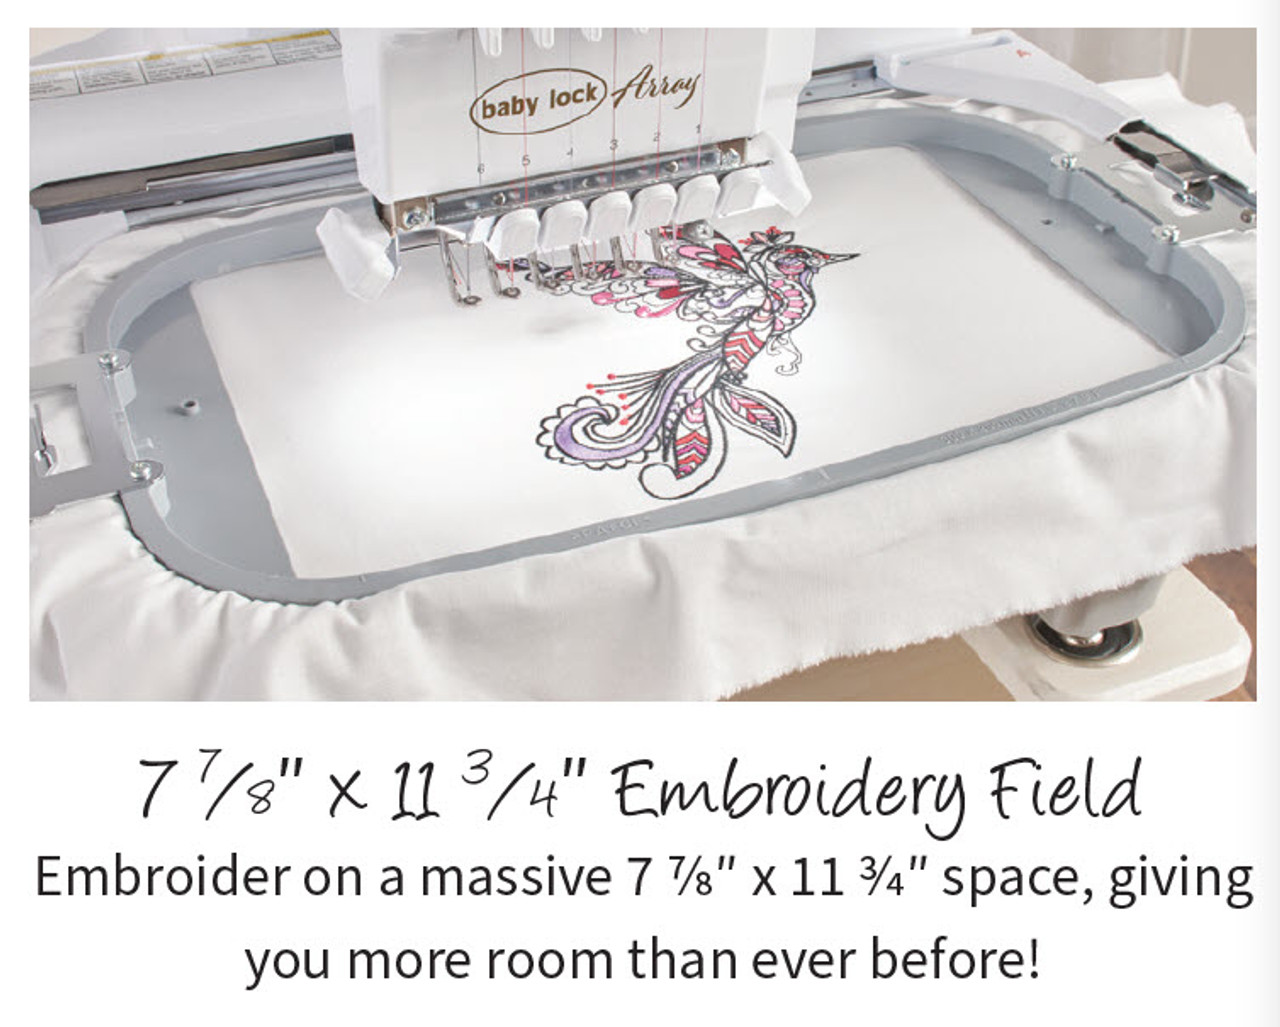 Baby Lock Array 6-needle embroidery machine – Aurora Sewing Center